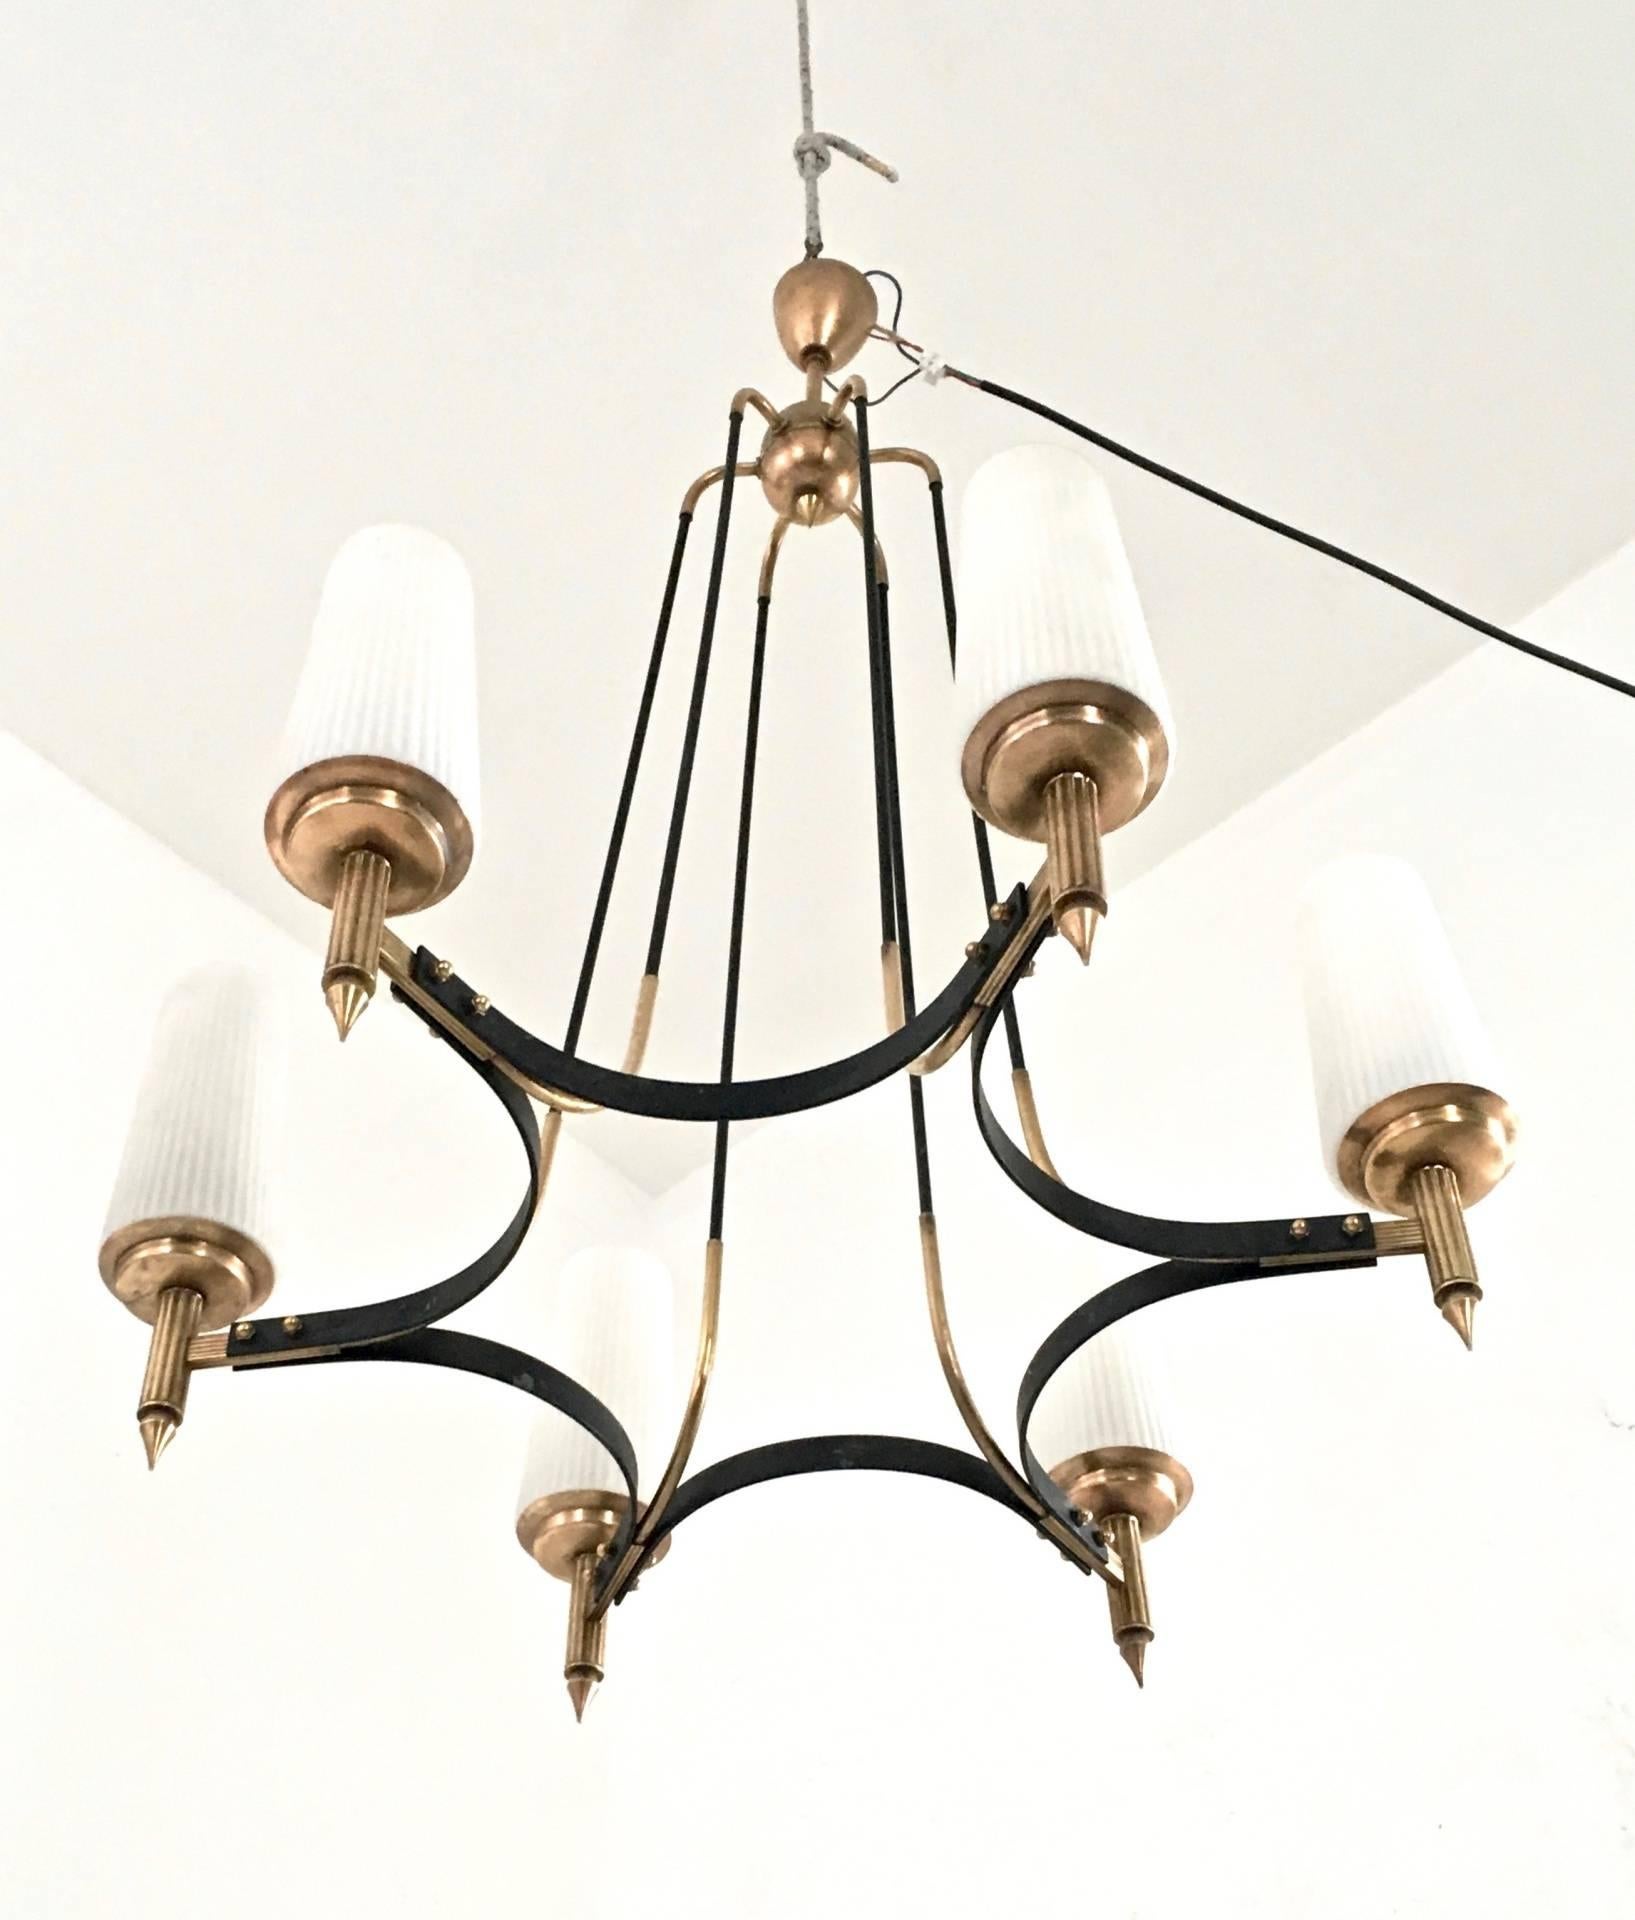 Mid-20th Century Opaline Glass, Brass and Varnished Iron Chandelier by Stilnovo, Italy, 1950s